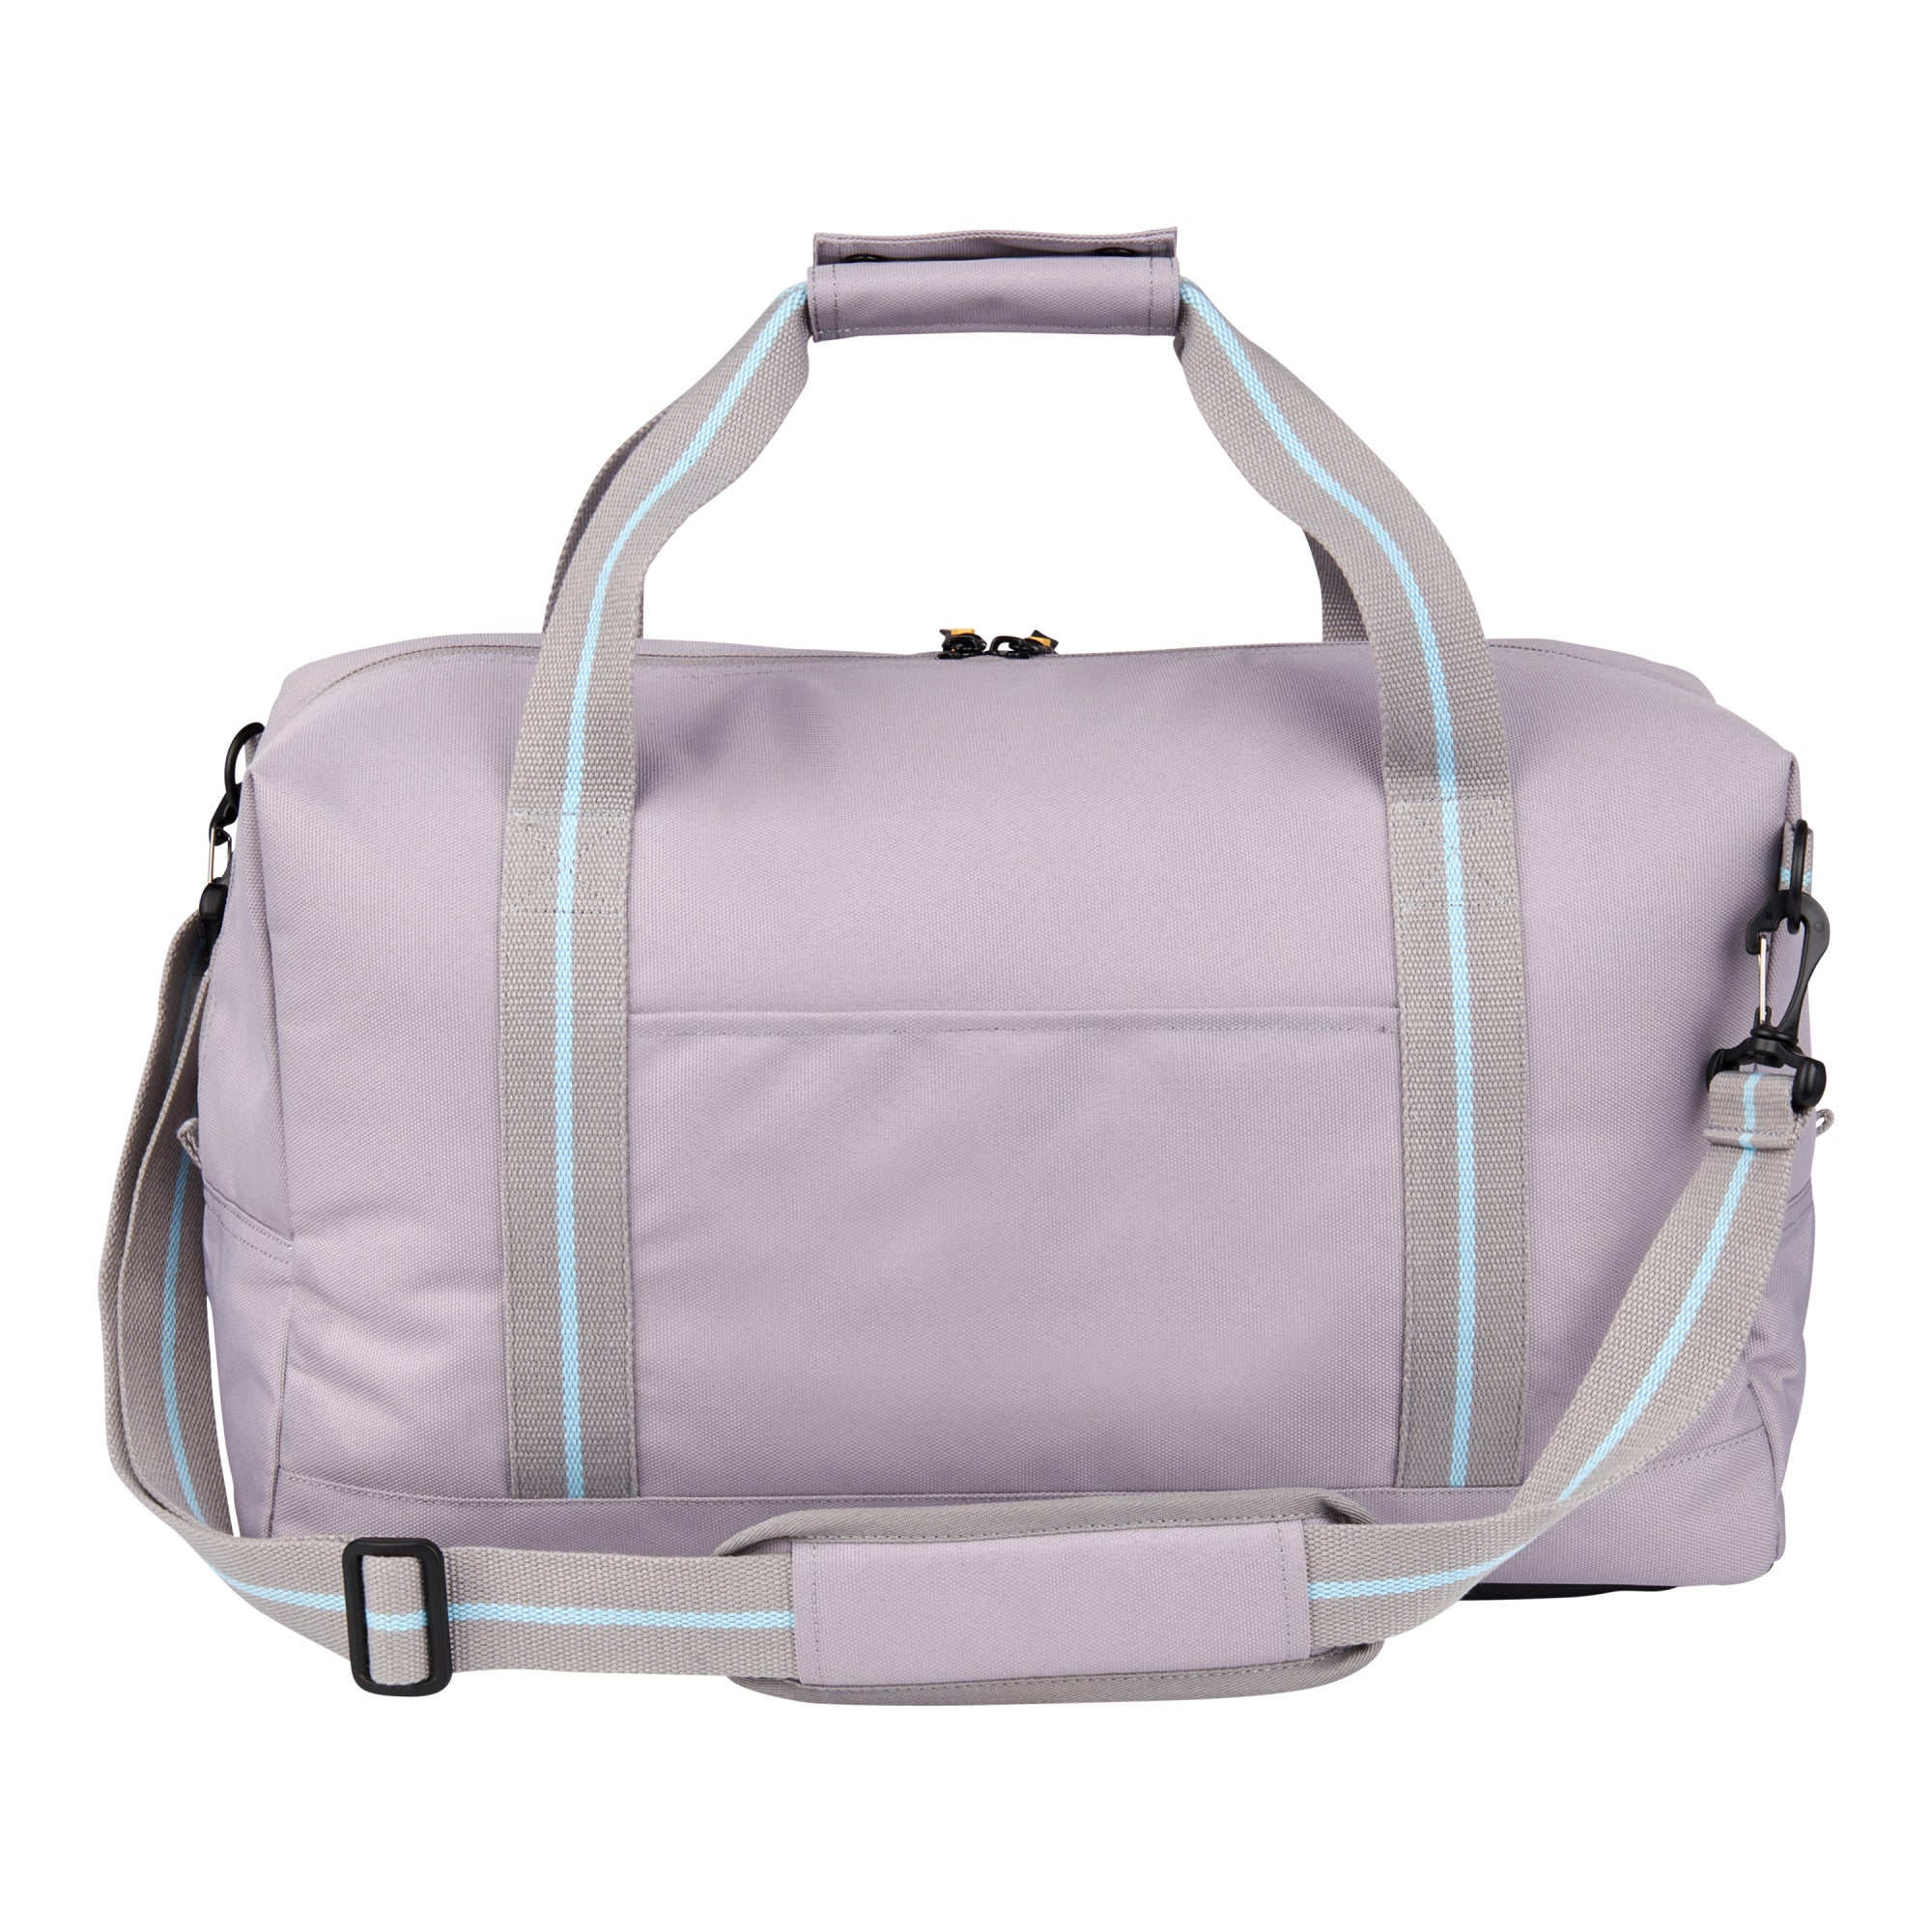 Travel Roller Bags, Duffel Bags, Carry On Bag, Gym Duffels - HEX